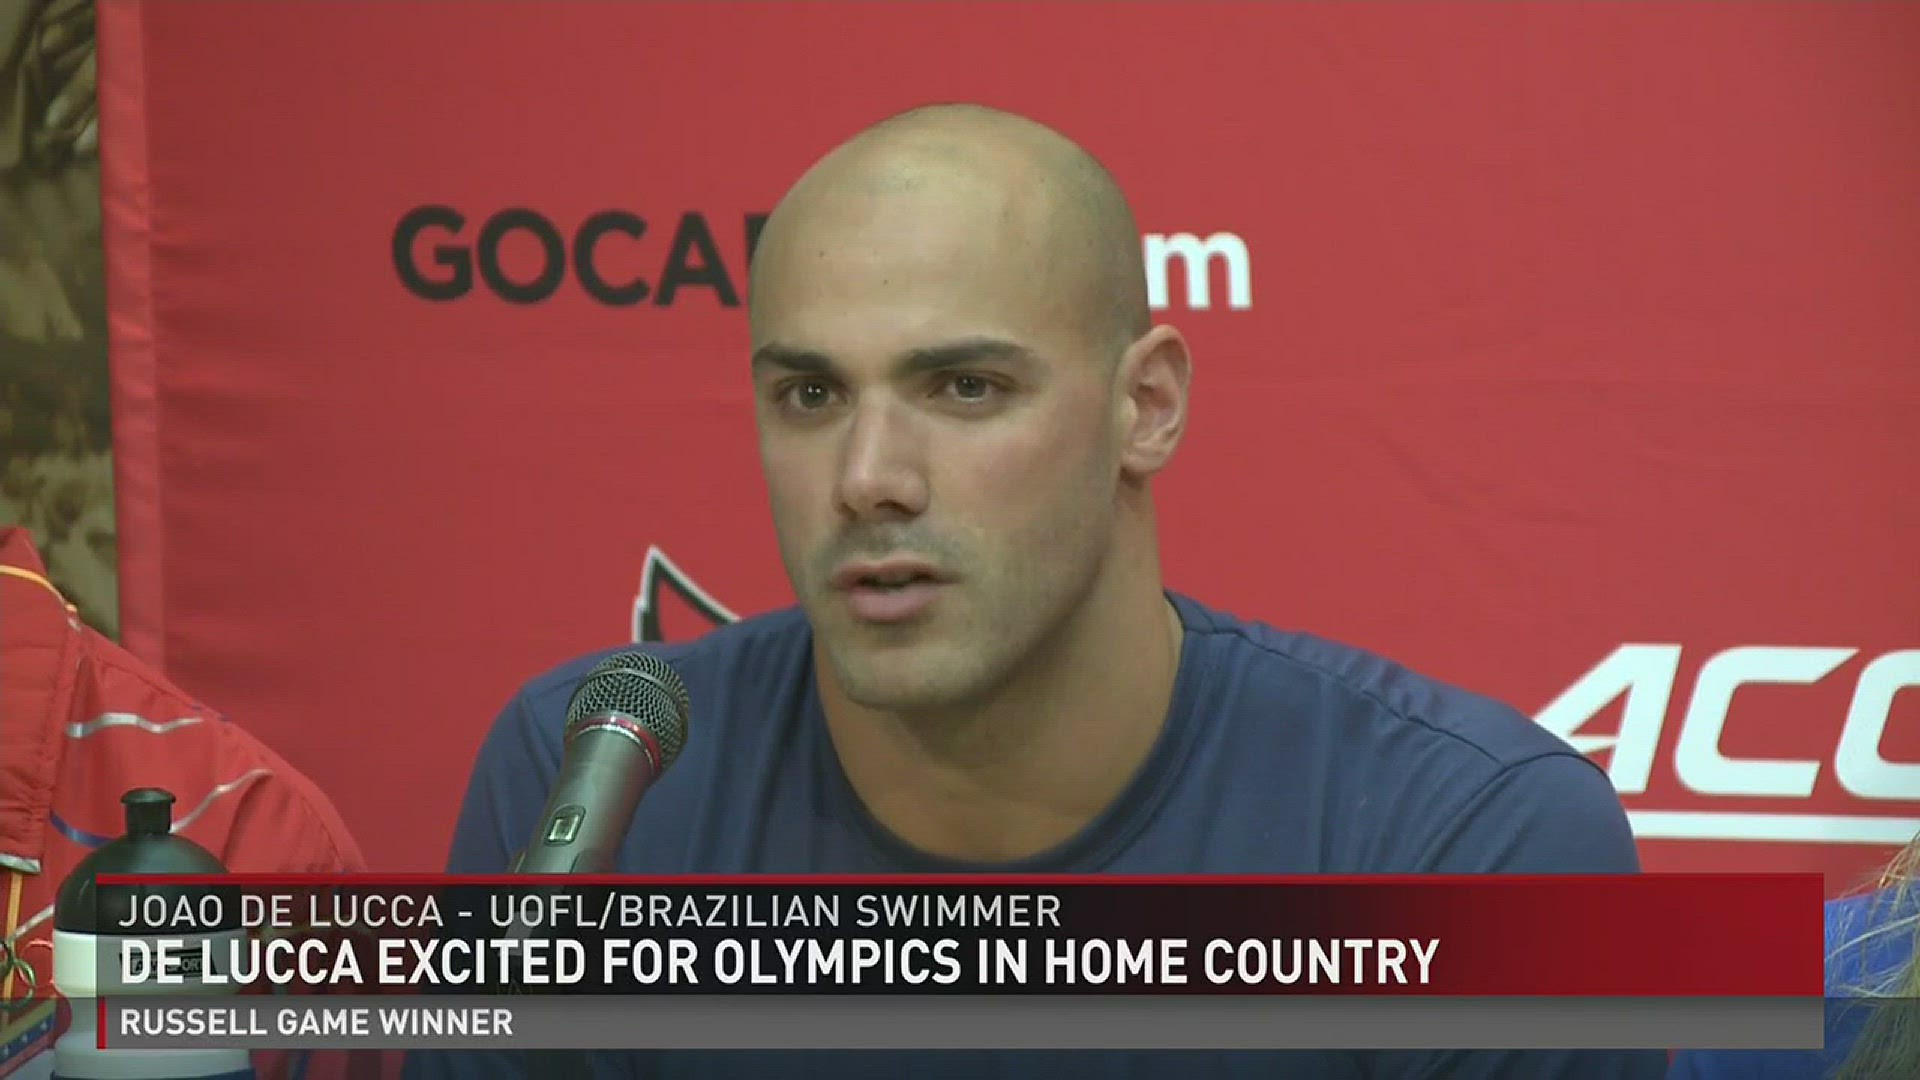 U of L swimmer Joao De Lucca excited to represent his home country of Brazil in the Rio Olympics